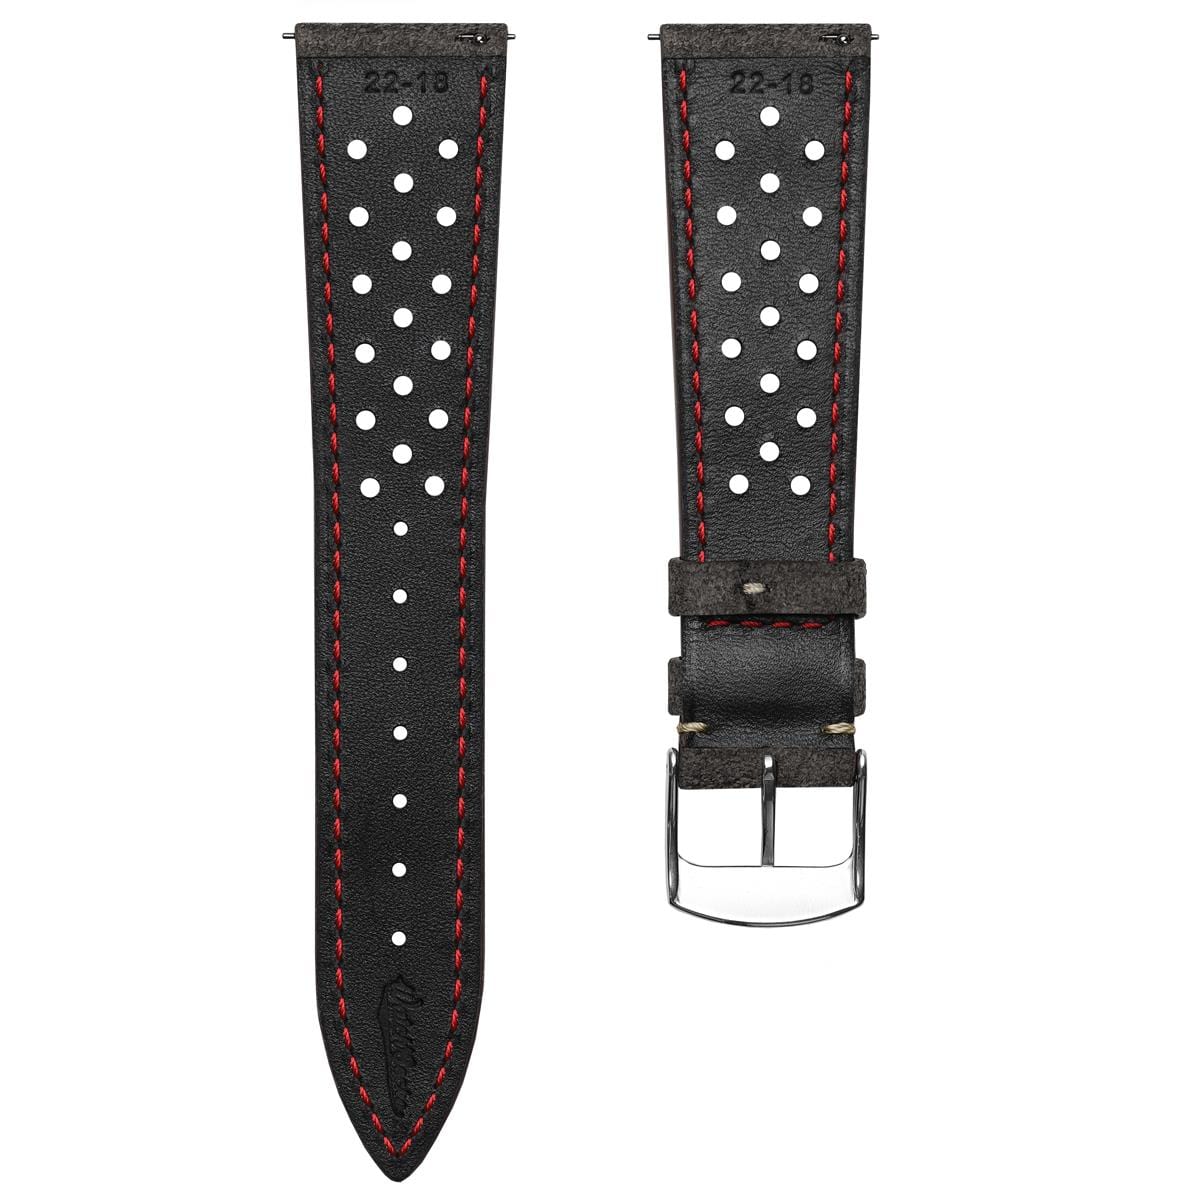 Beaufort Racing Conceria Opera Suede Perforated Watch Strap - Taupe